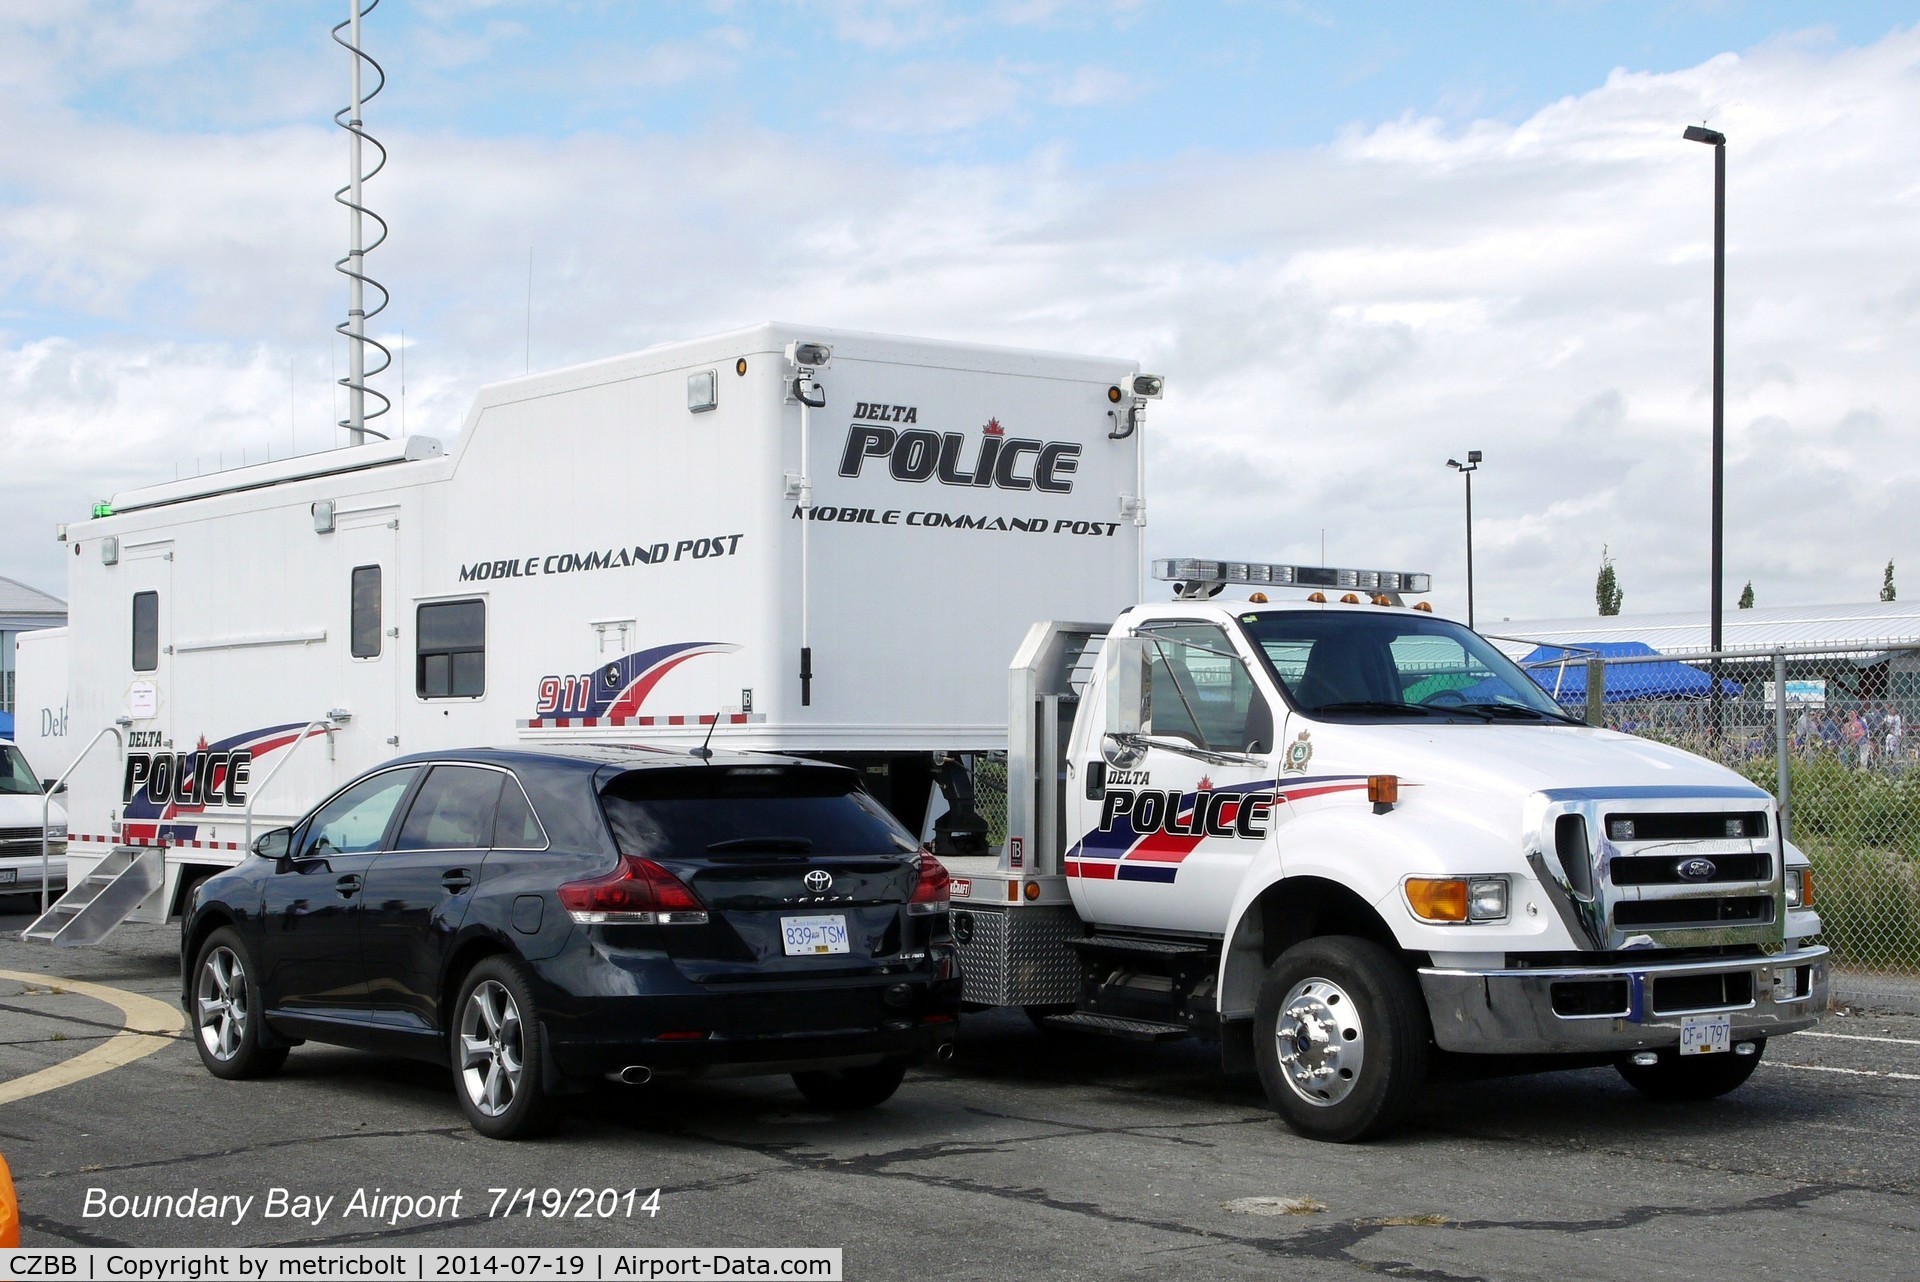 Boundry Bay Airport, Boundry Bay Canada (CZBB) - Police presence at the Boundary Bay Airshow 2014